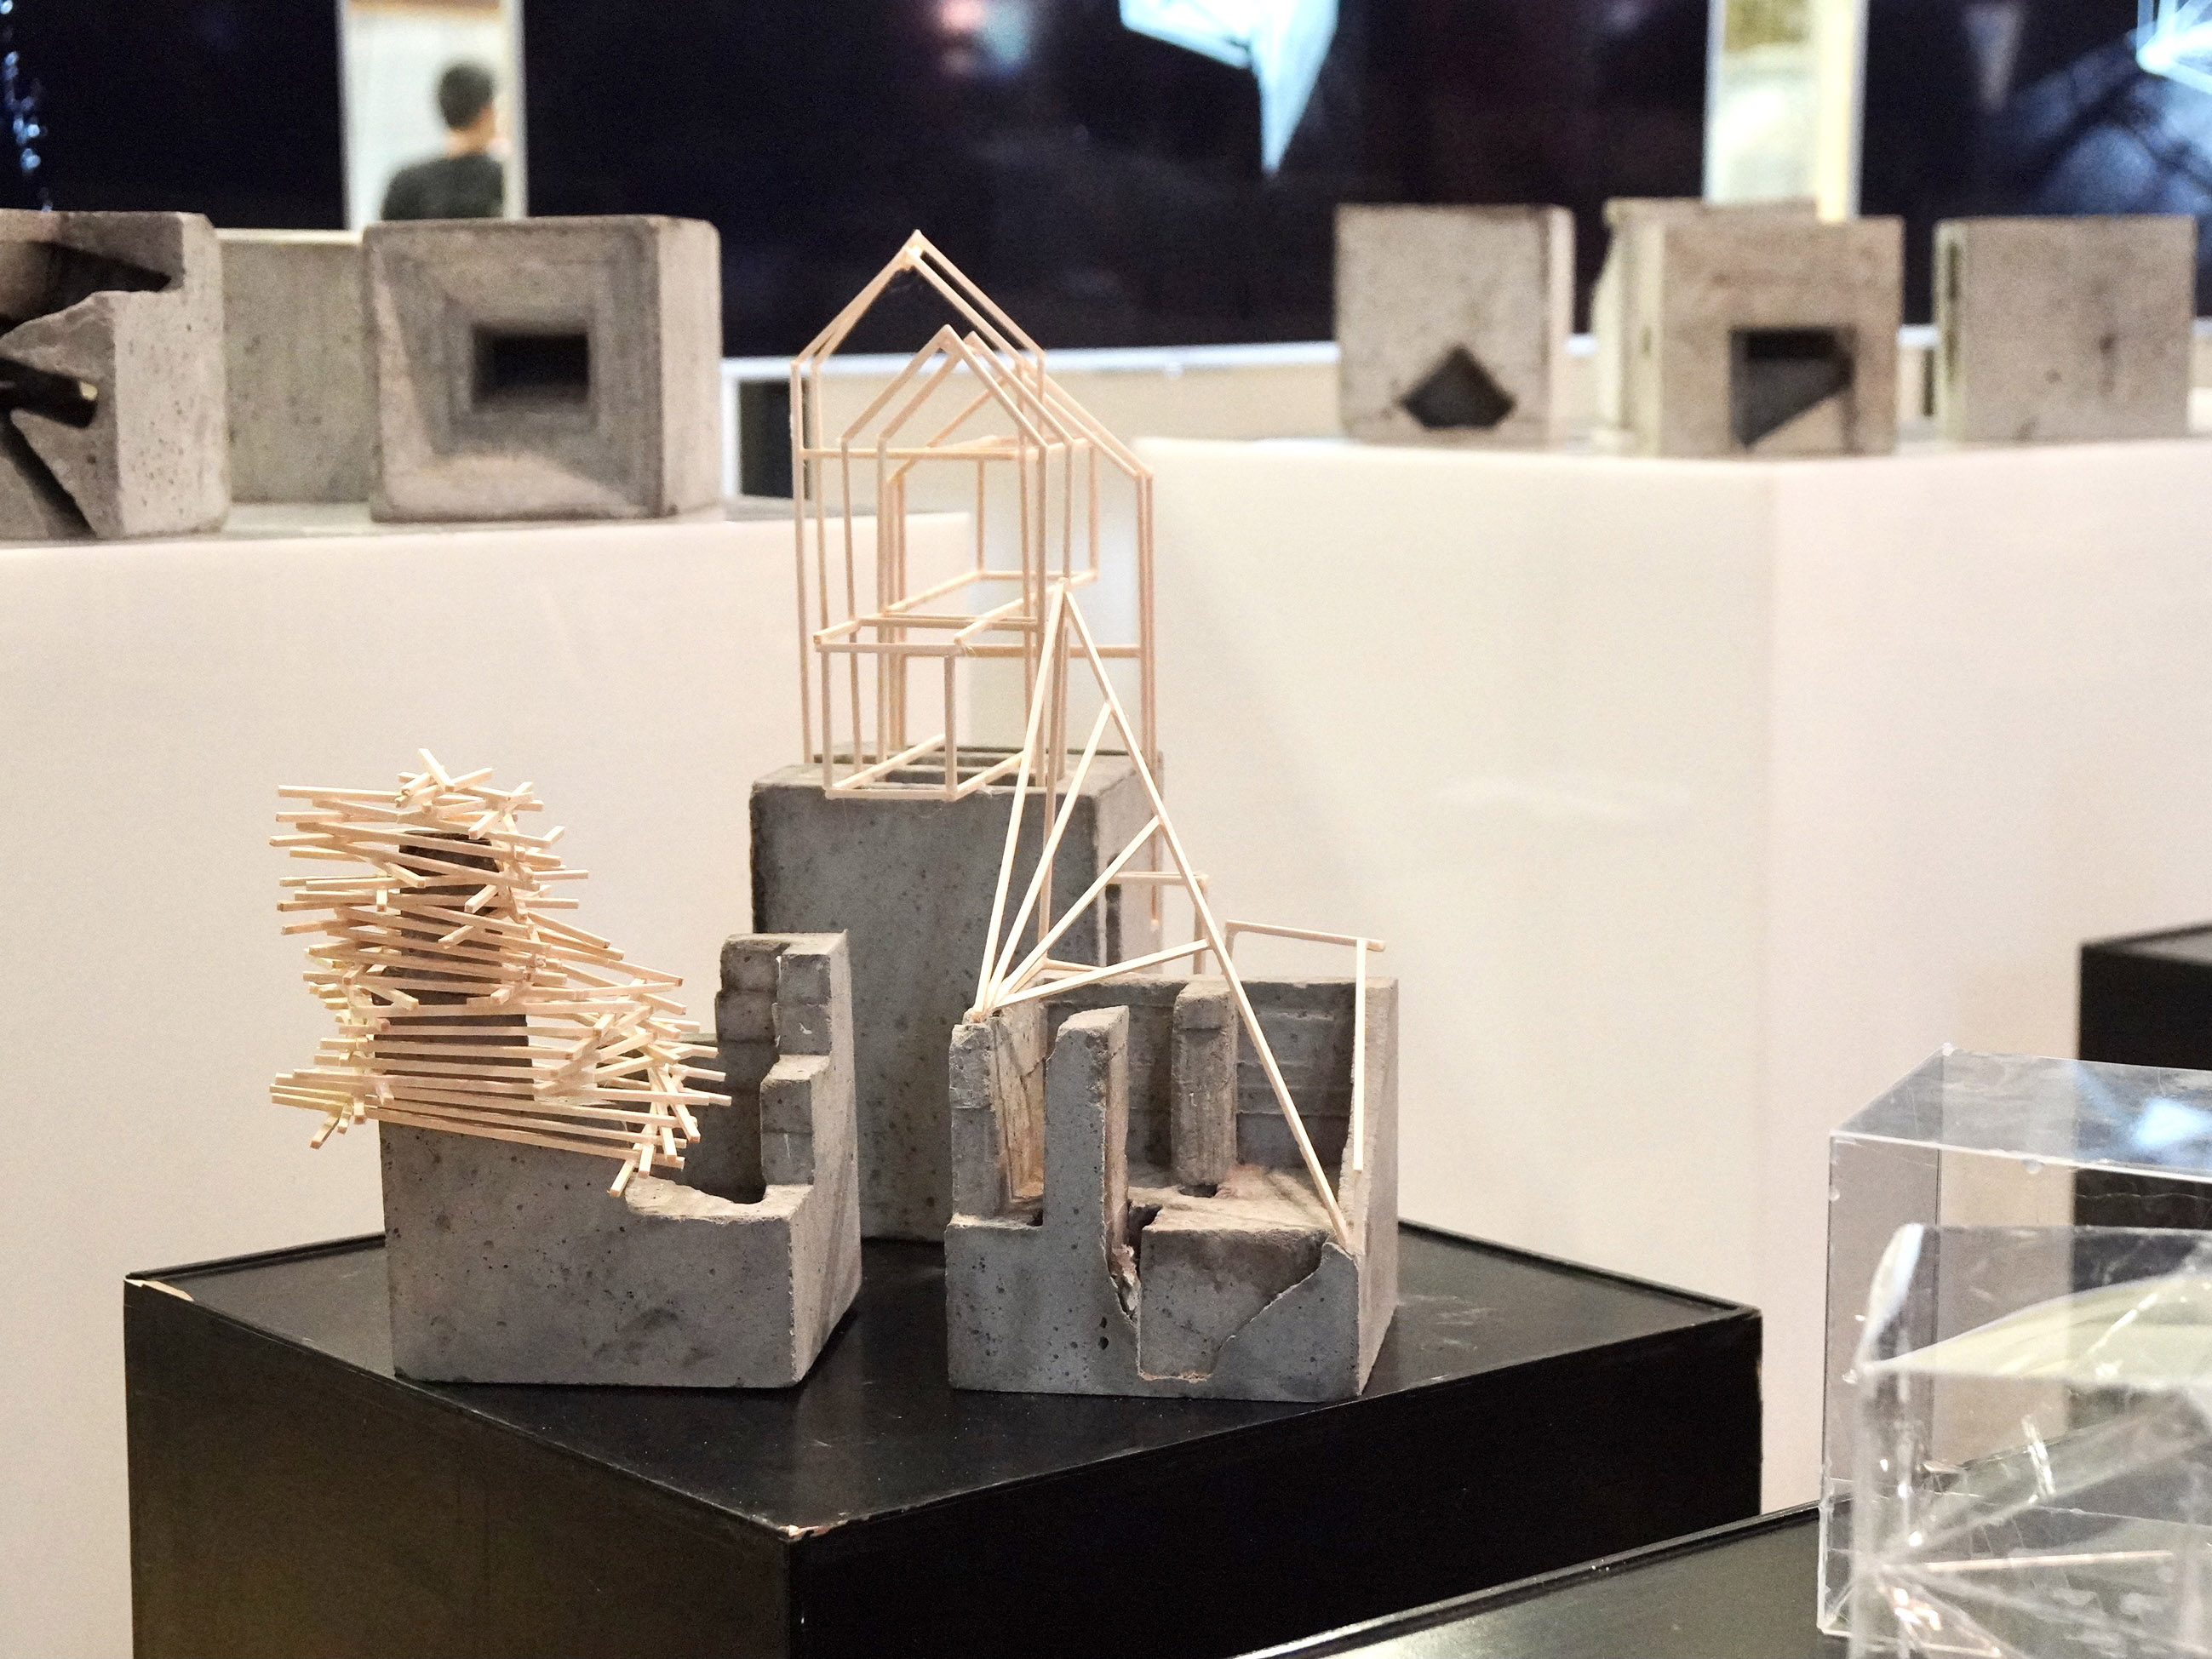 Architecture workshop explores the importance of materials